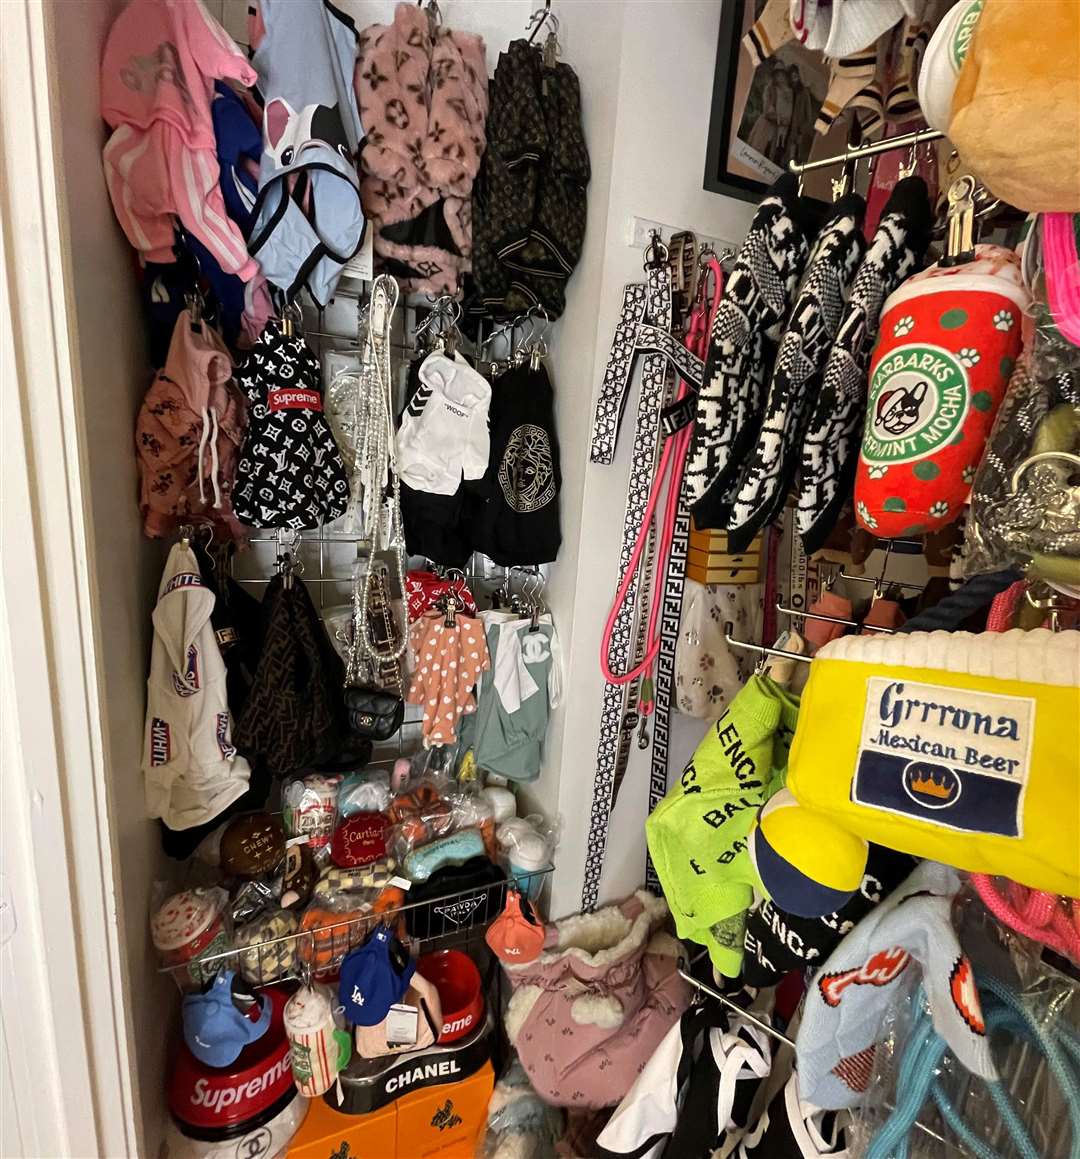 The cupboard was quickly filled with stock at their home in Repton. Picture: Lauren Knight-Carroll